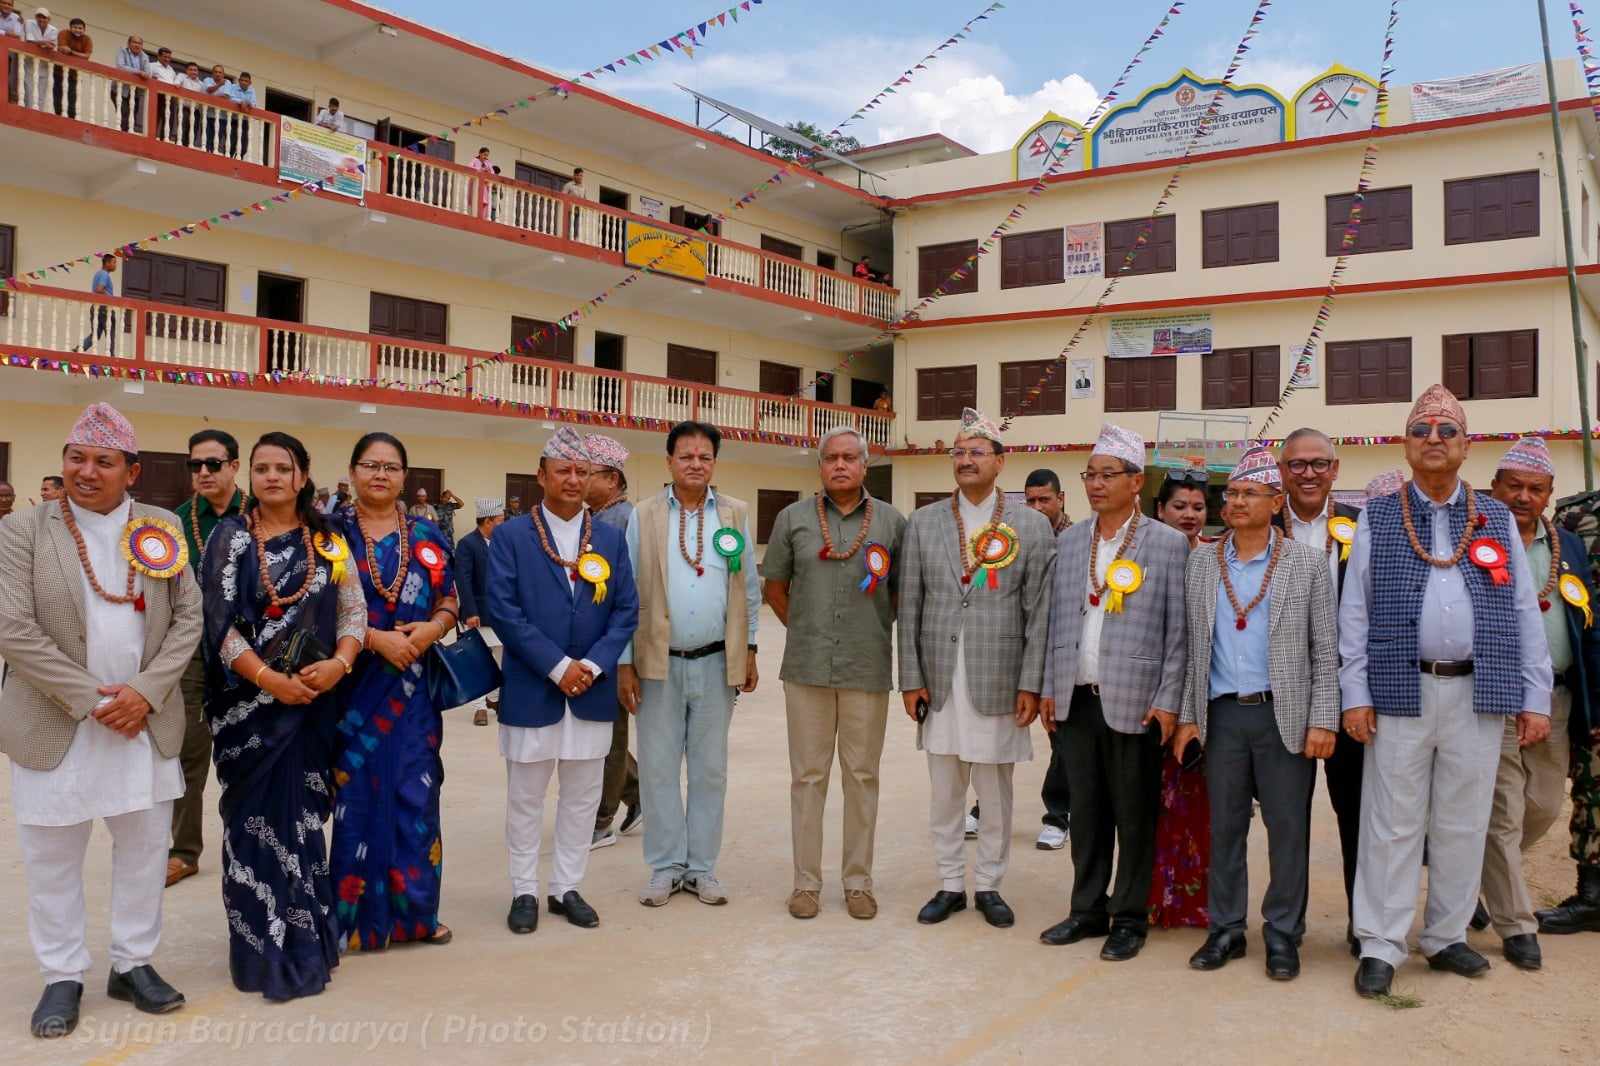 FM Saud and Indian envoy Srivastava jointly inaugurate campus building built with Indian assistance